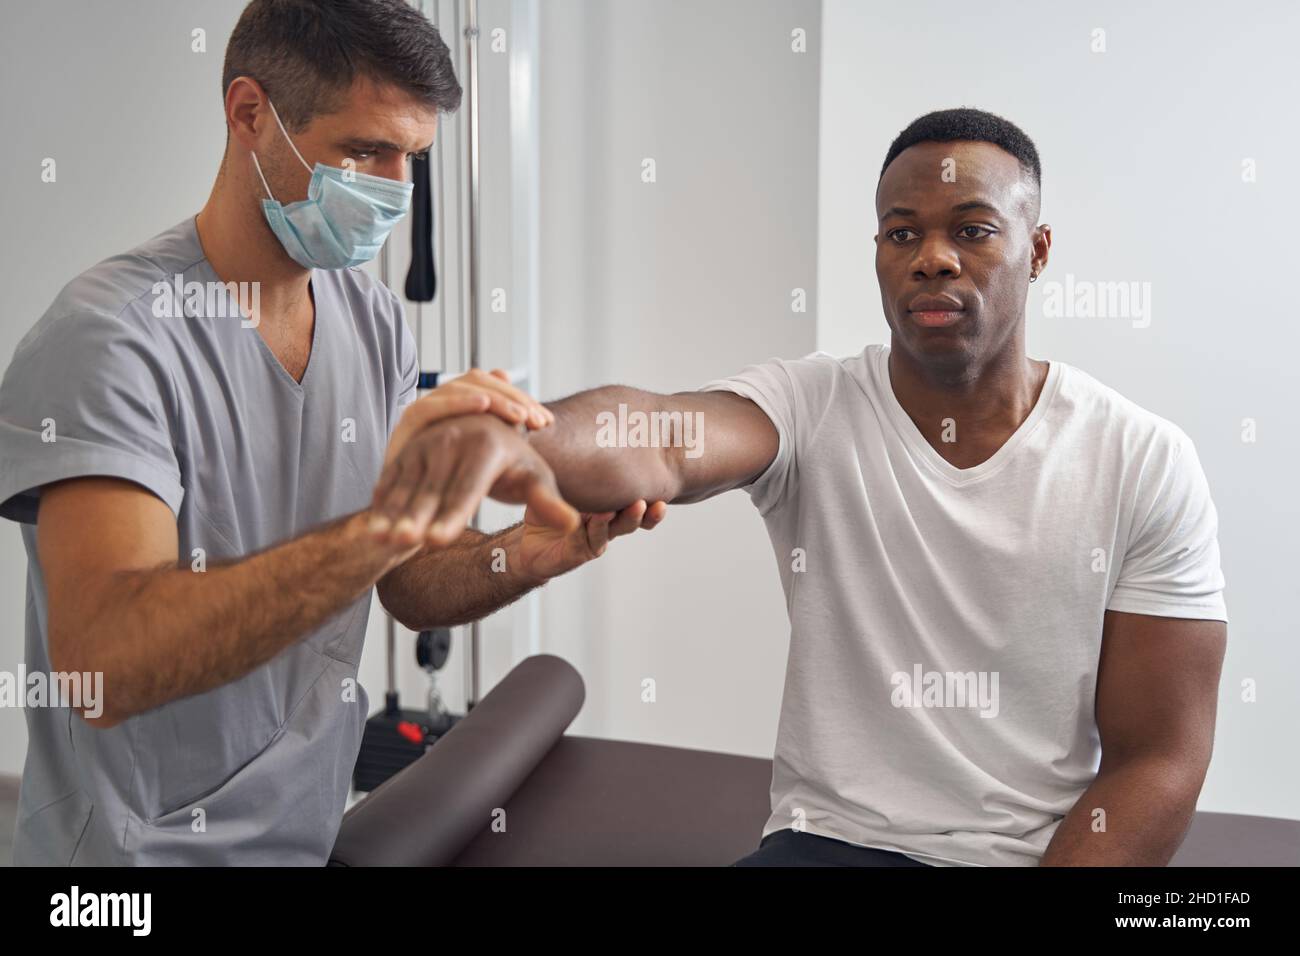 Young man having his muscle strength assessed Stock Photo